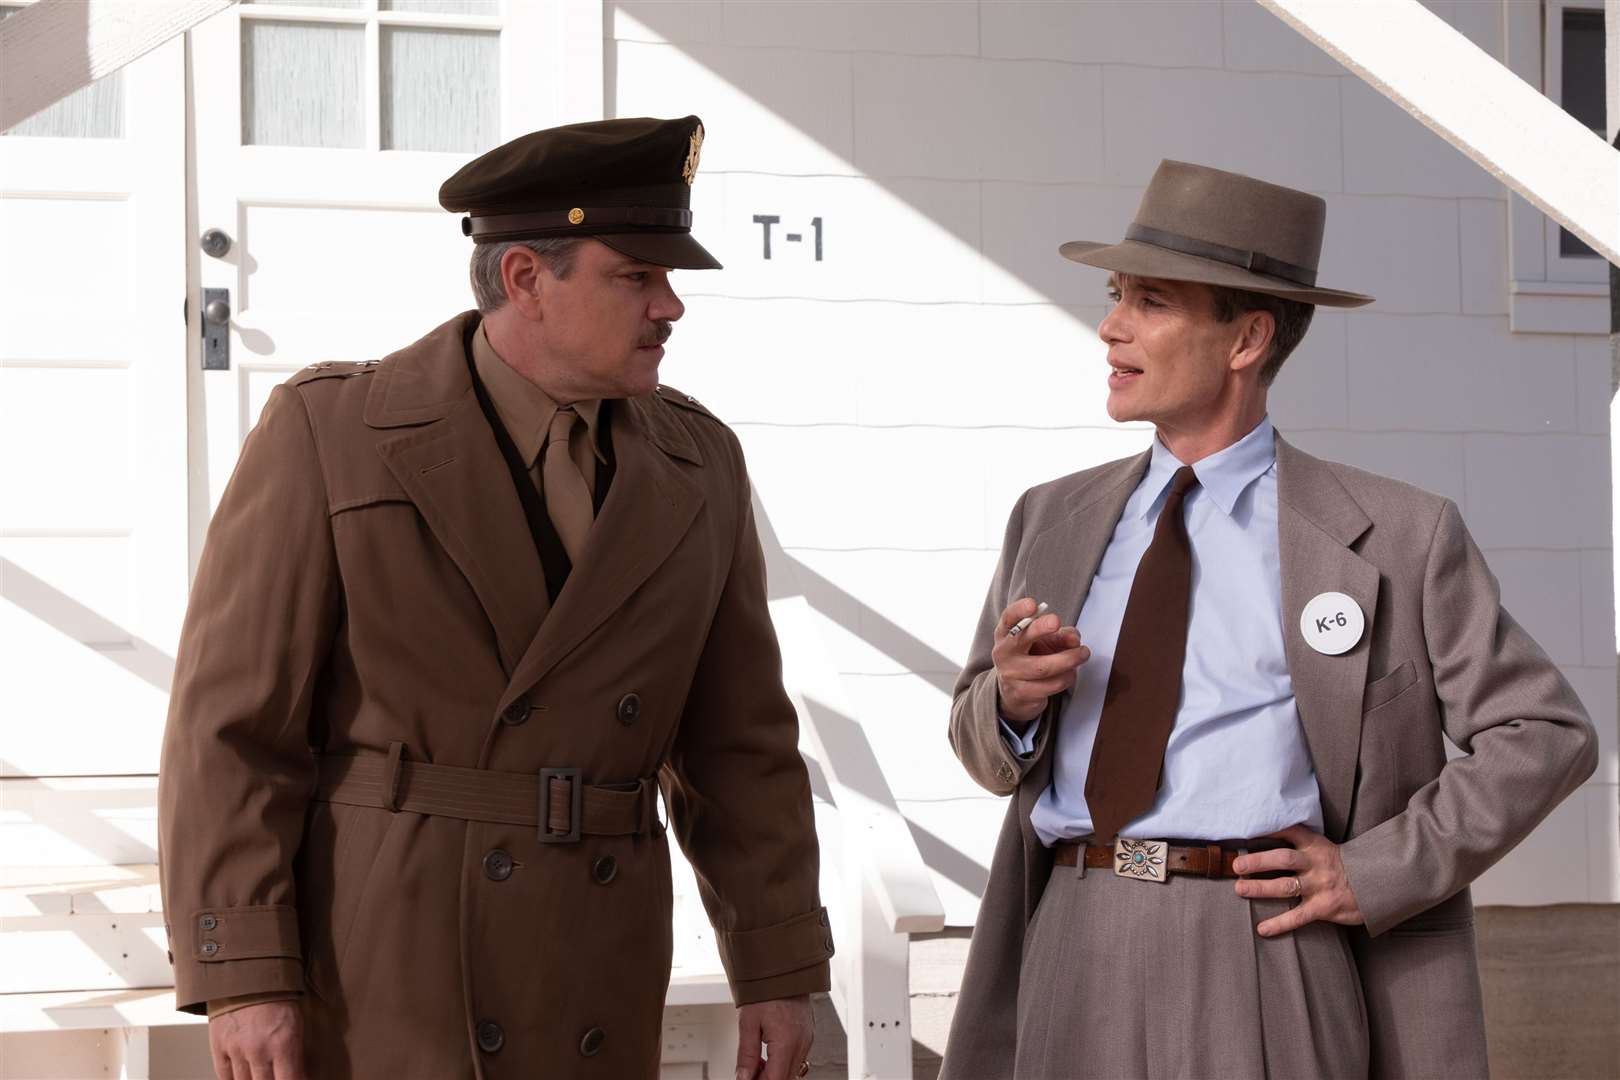 A still from Oppenheimer which stars Cillian Murphy as the main character (at right).